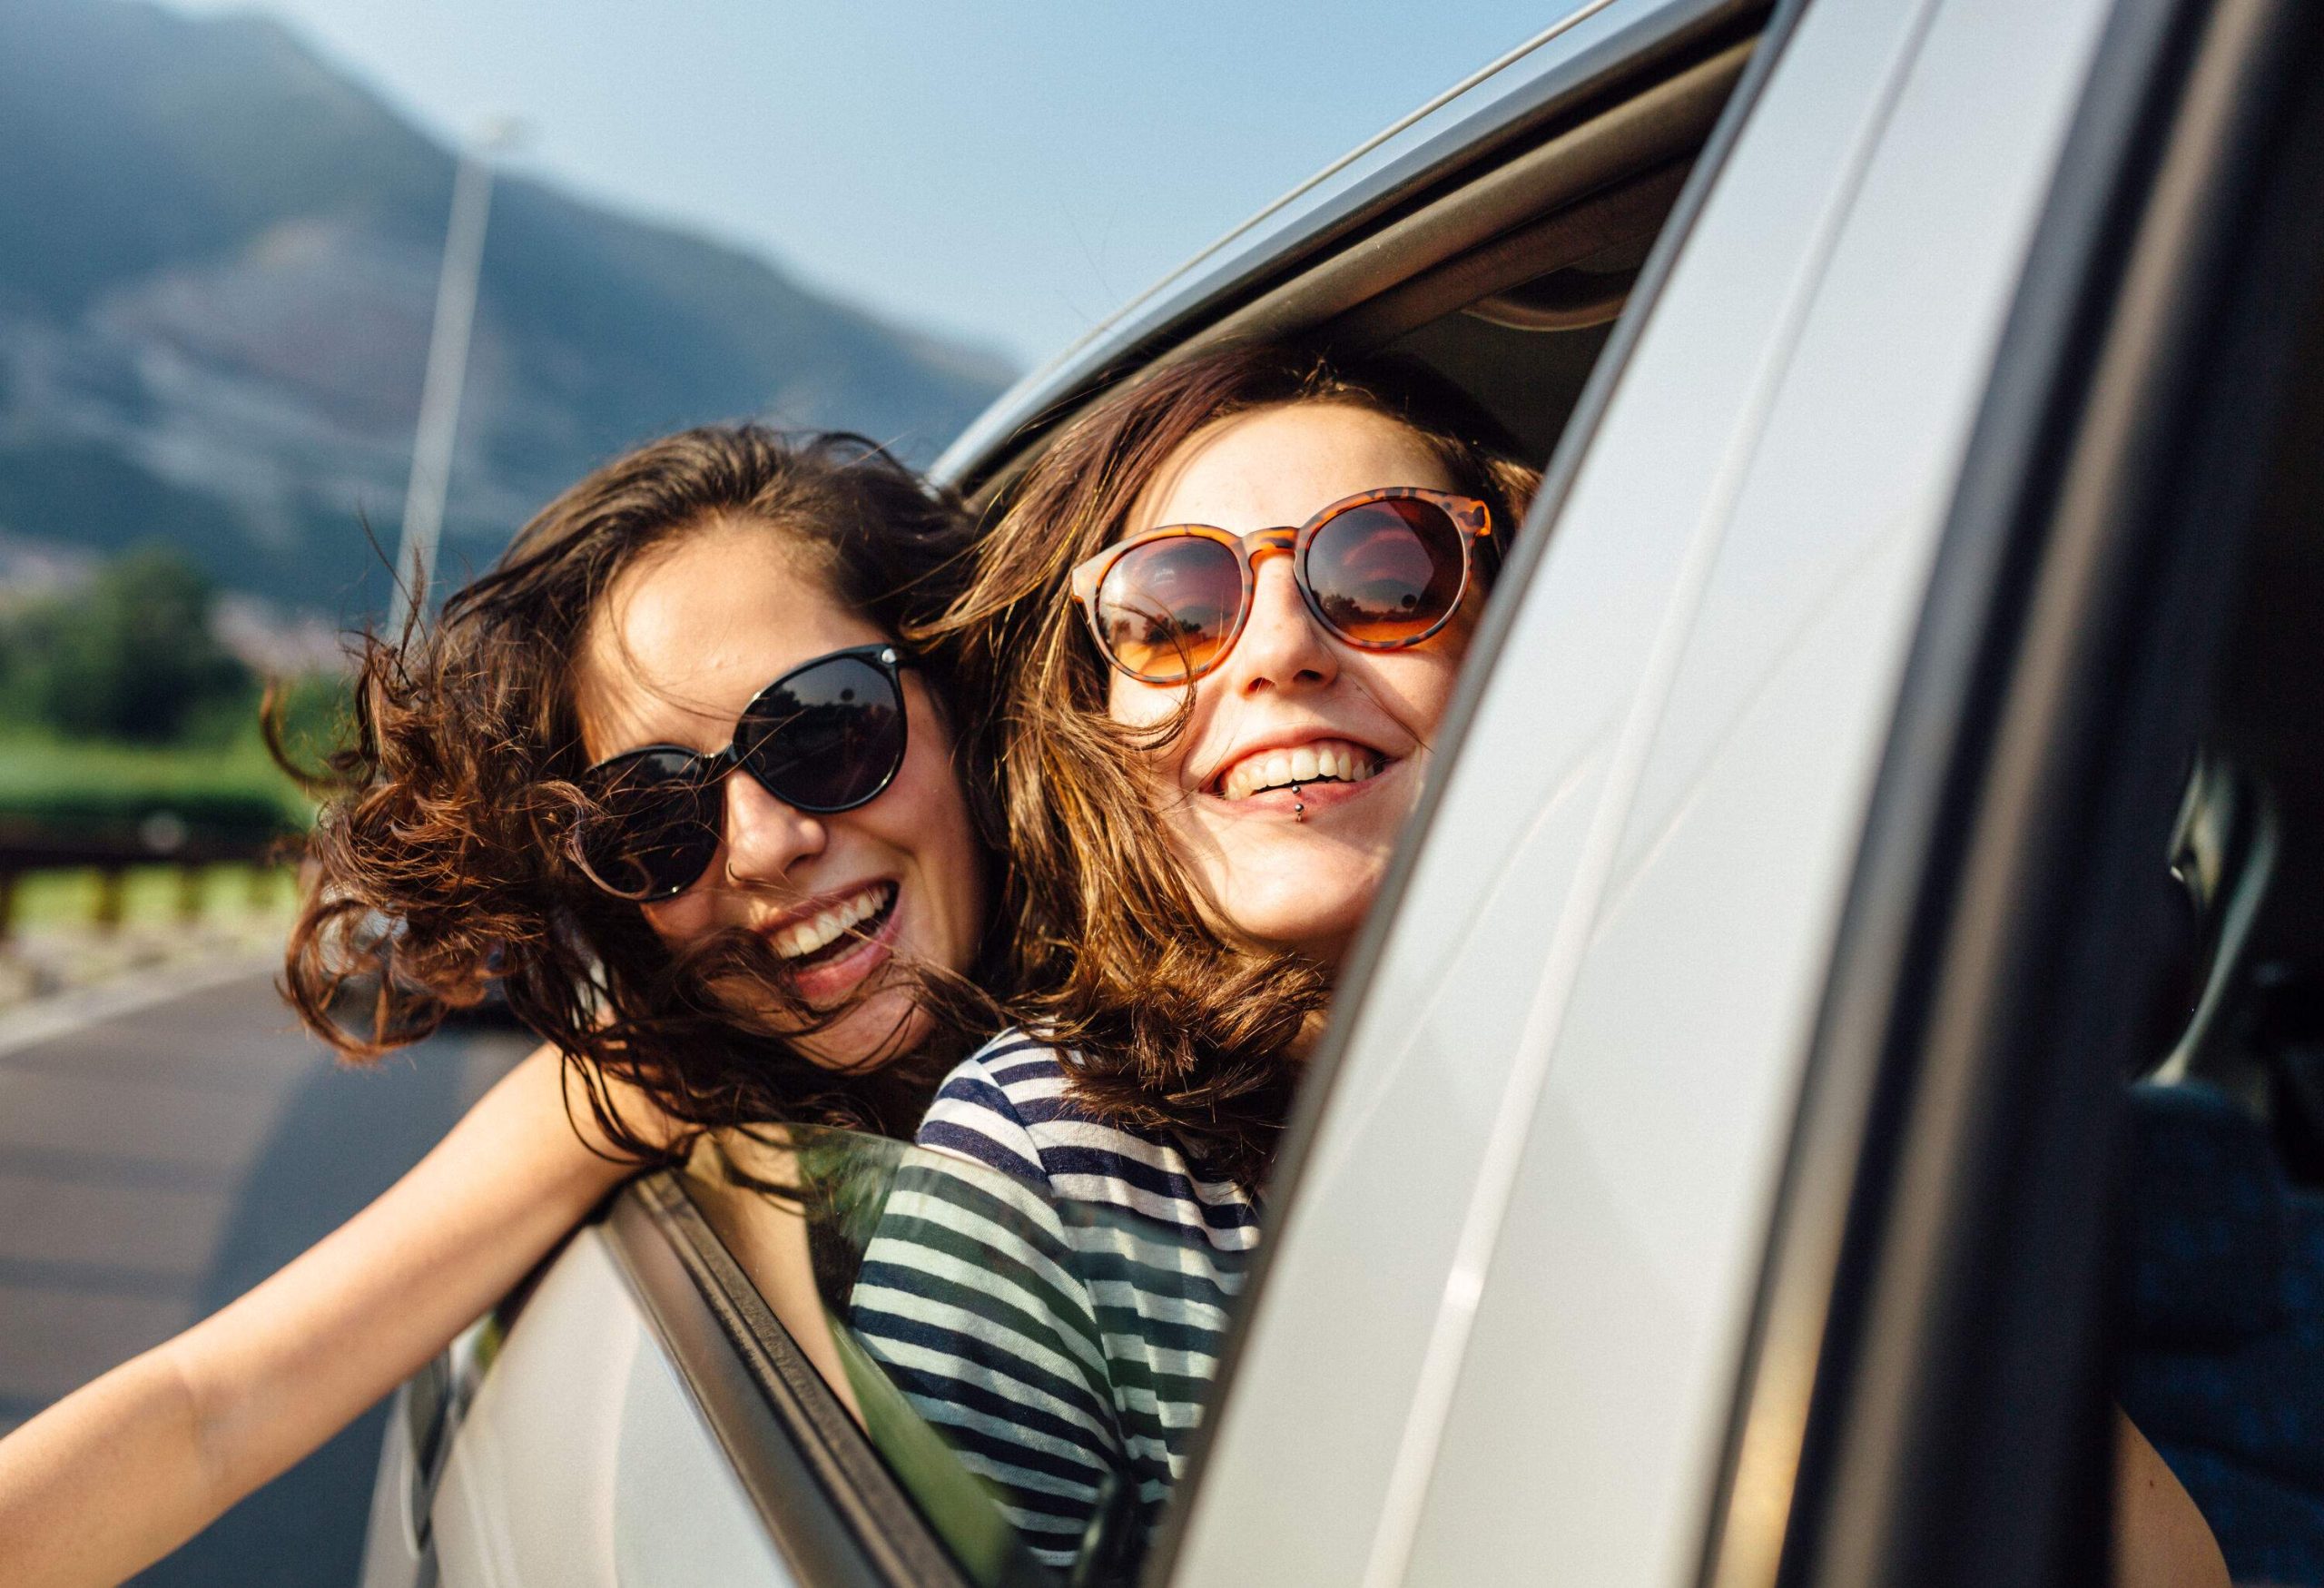 Young women friends embark on a thrilling car trip, leaning out of the car window with their heads out, basking in the refreshing breeze while sporting stylish sunglasses.